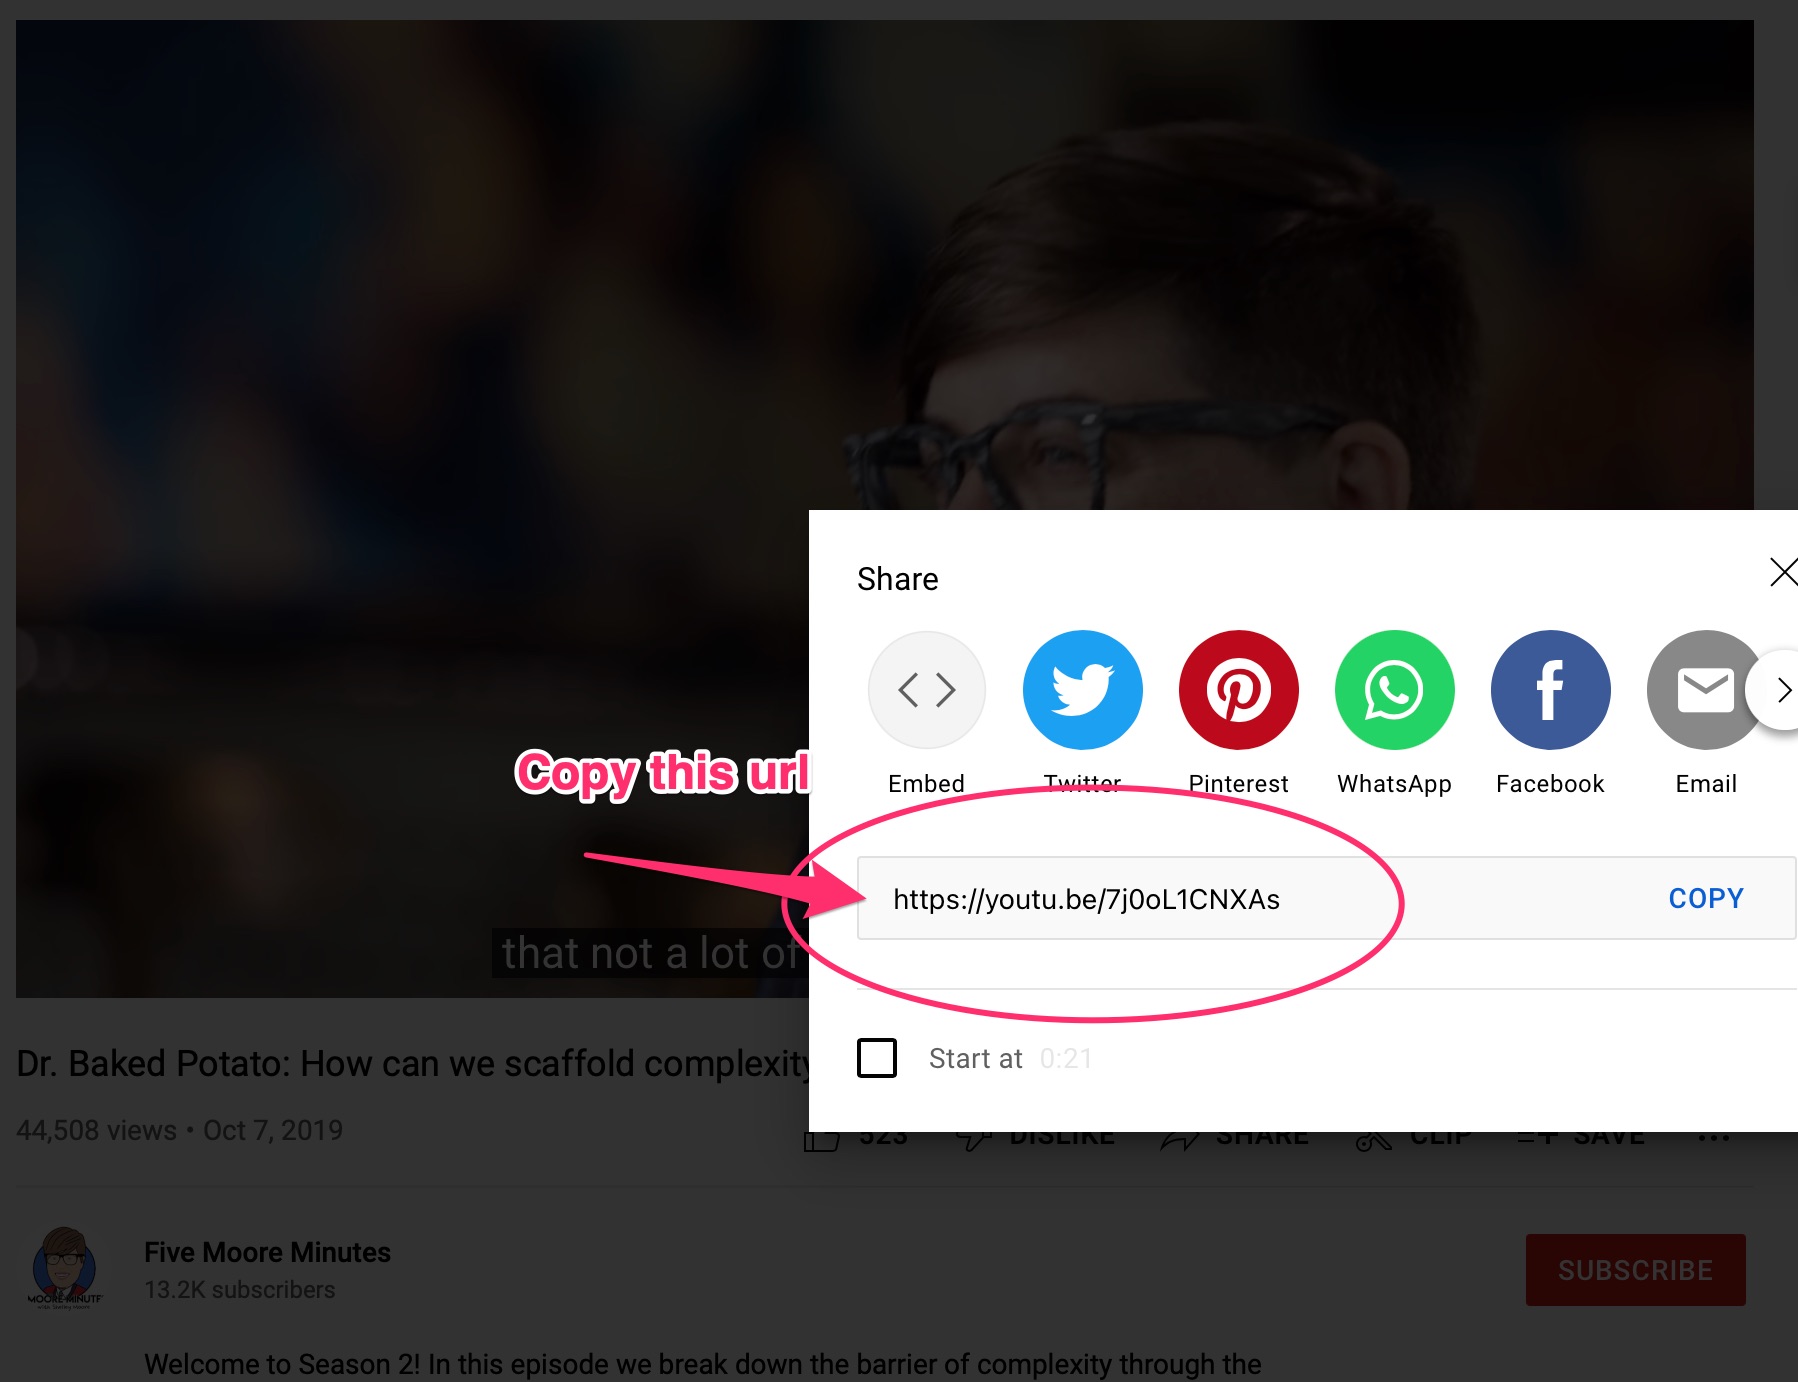 A screenshot of the dialog box you get when you click Share on a YouTube video. The short url is circled with text COPY THIS BIT